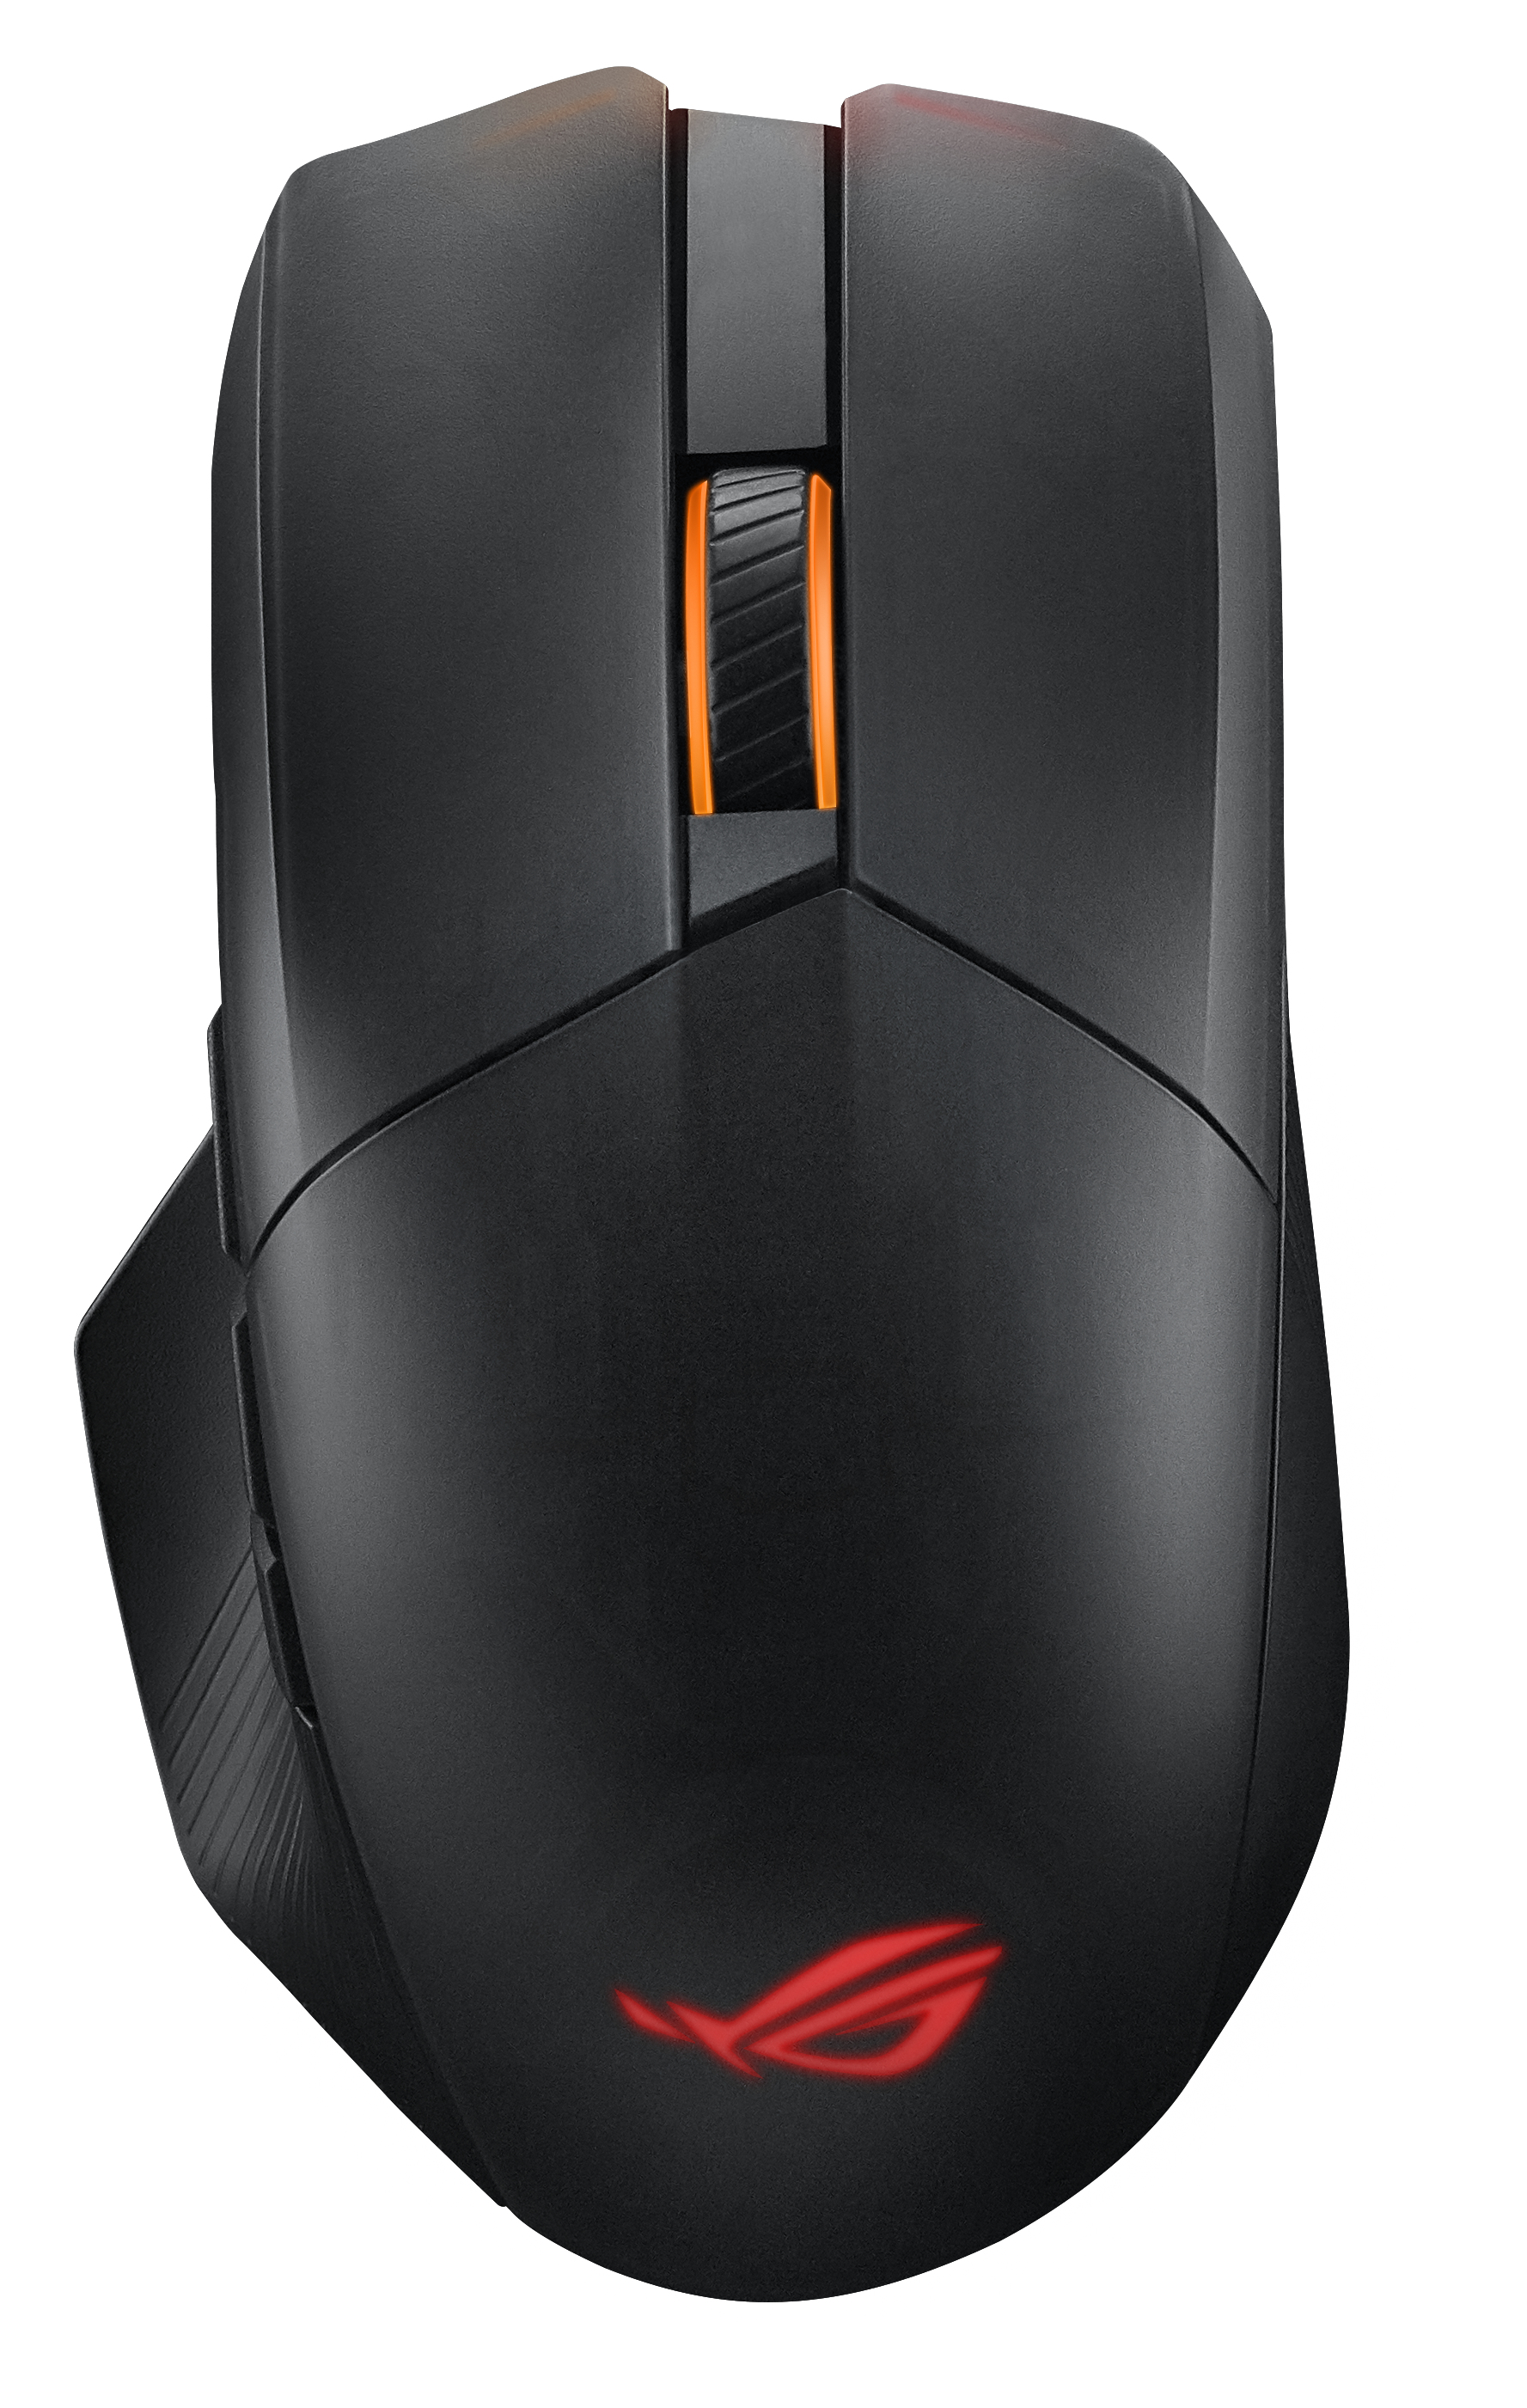 ASUS ROG CHAKRAM X GAMING MOUSE TRI MODE CONNECTIVITY 2.4GHZ RF, BLUETOOTH, WIRE